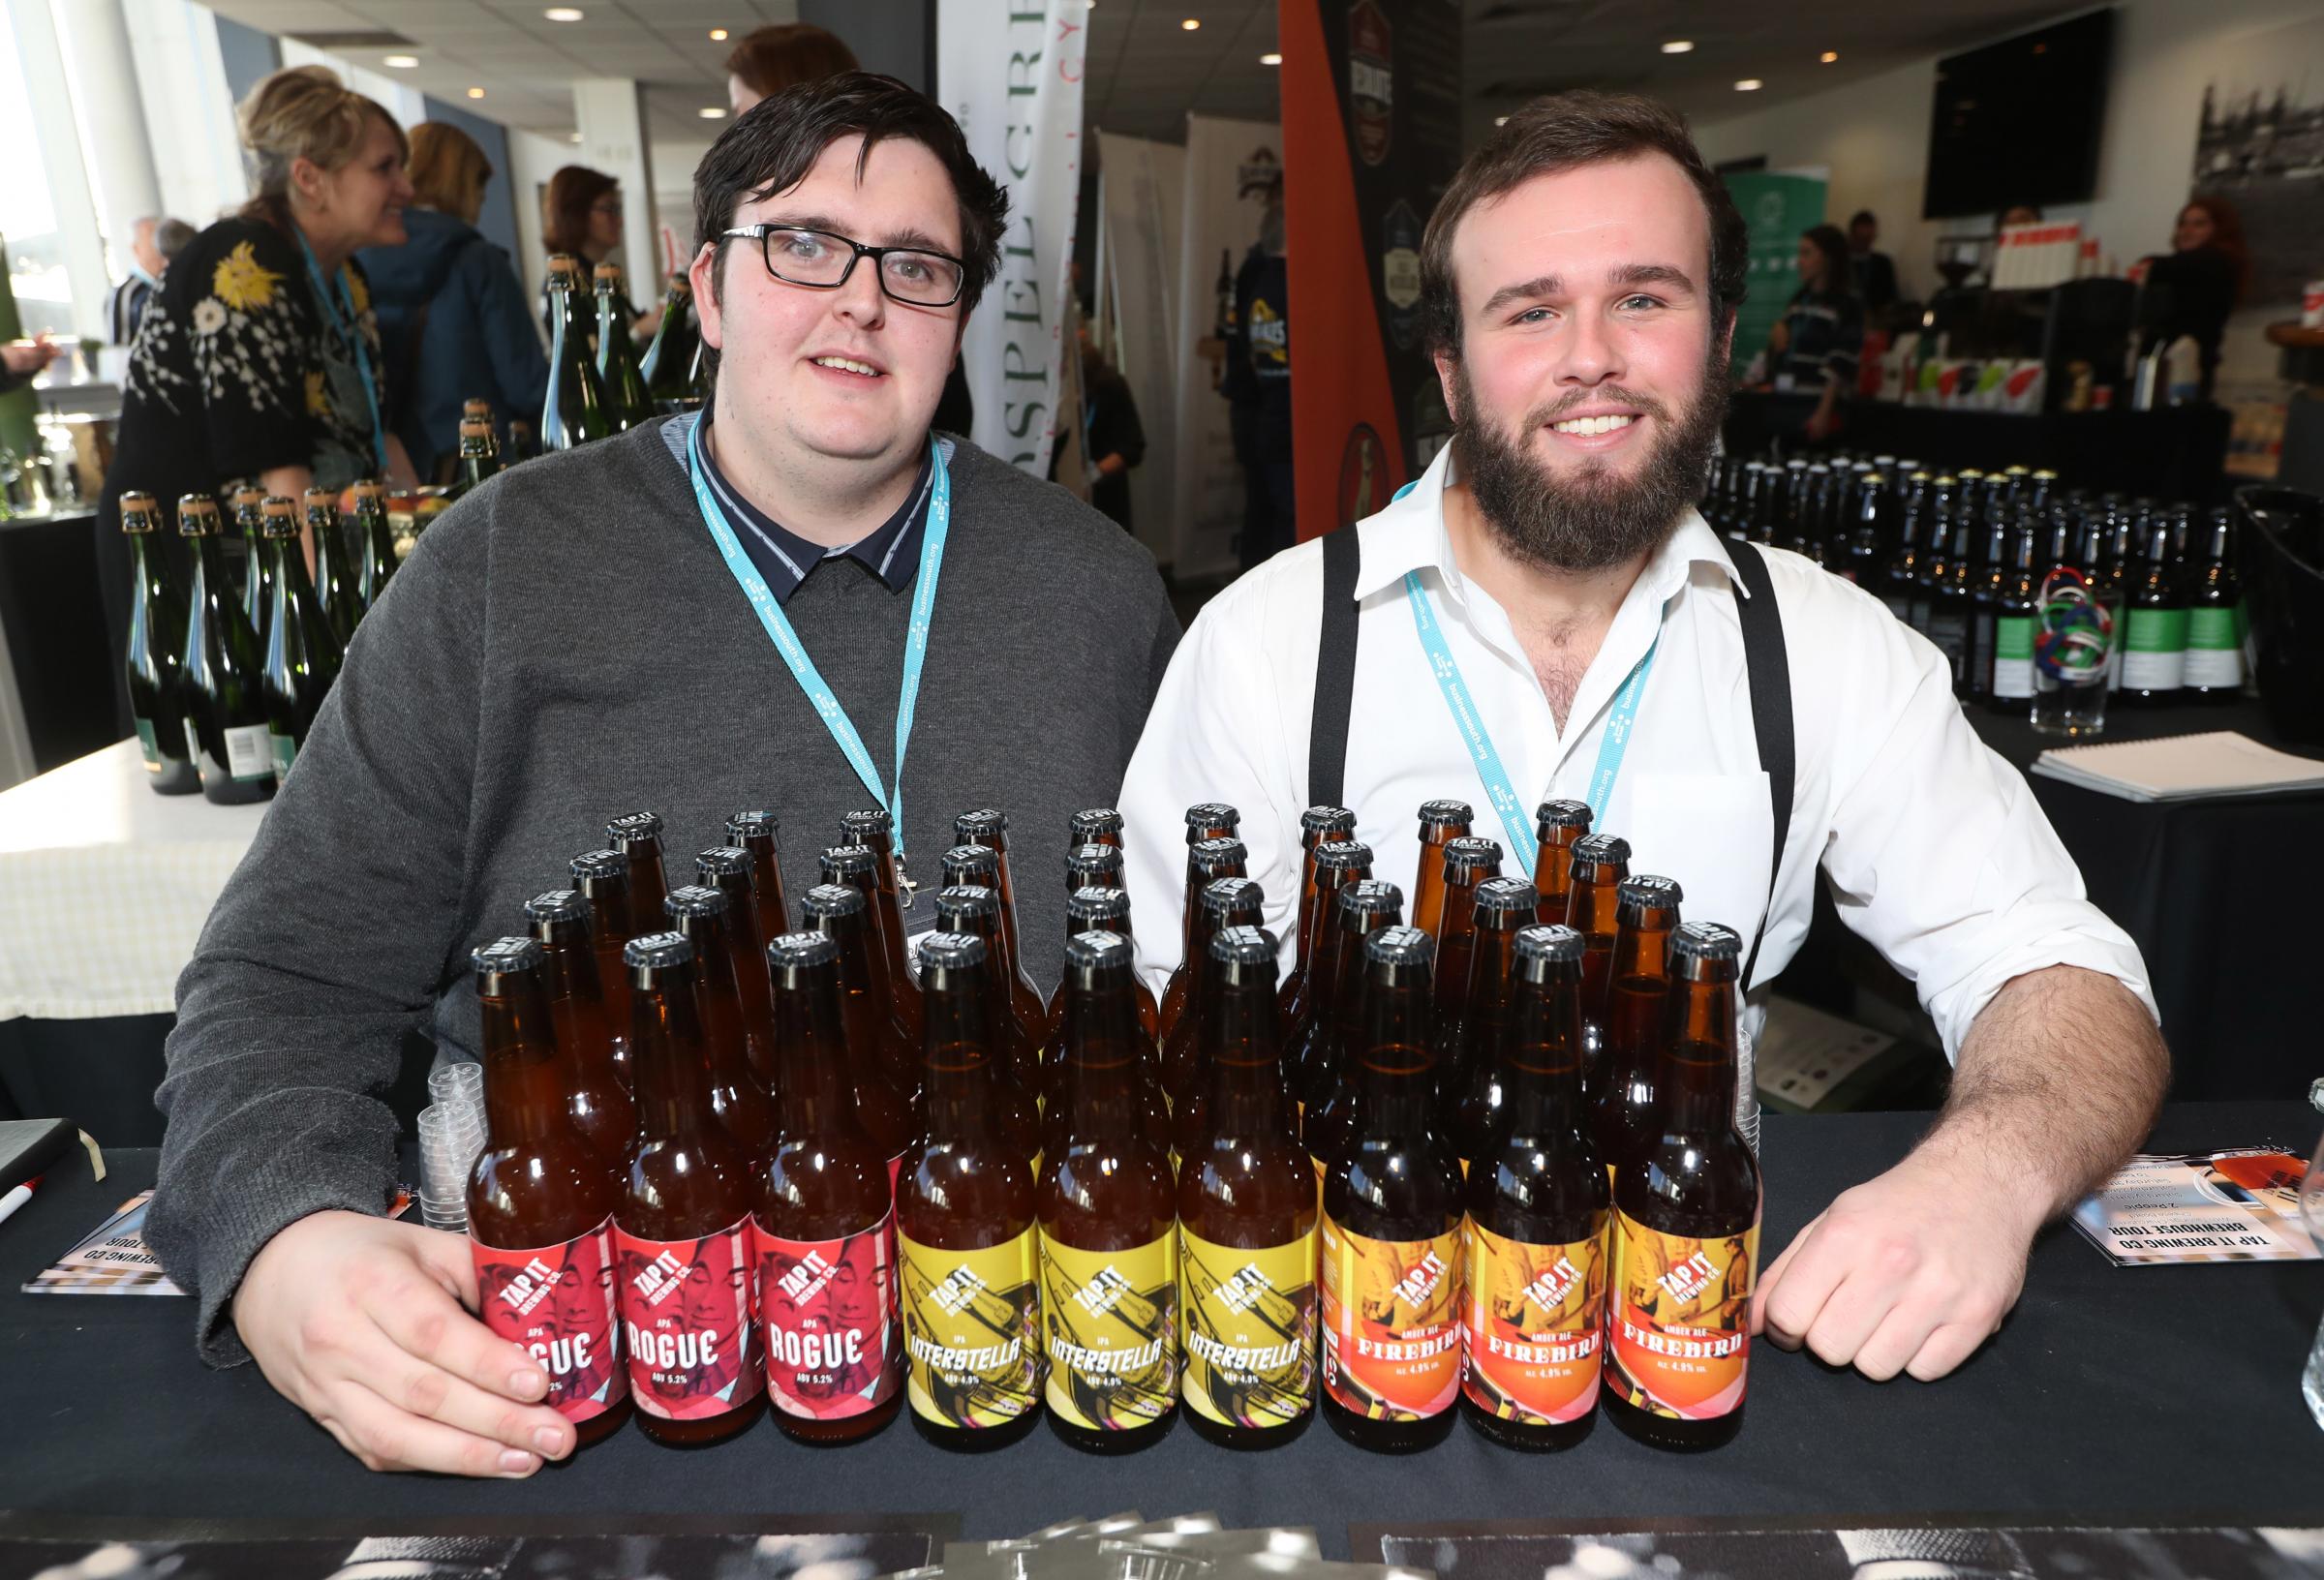 Local Produce Show at St Marys Stadium orgainsed by Business South. Joe Cleave and Will Keeble from Tap It Brewing based in Southampton.